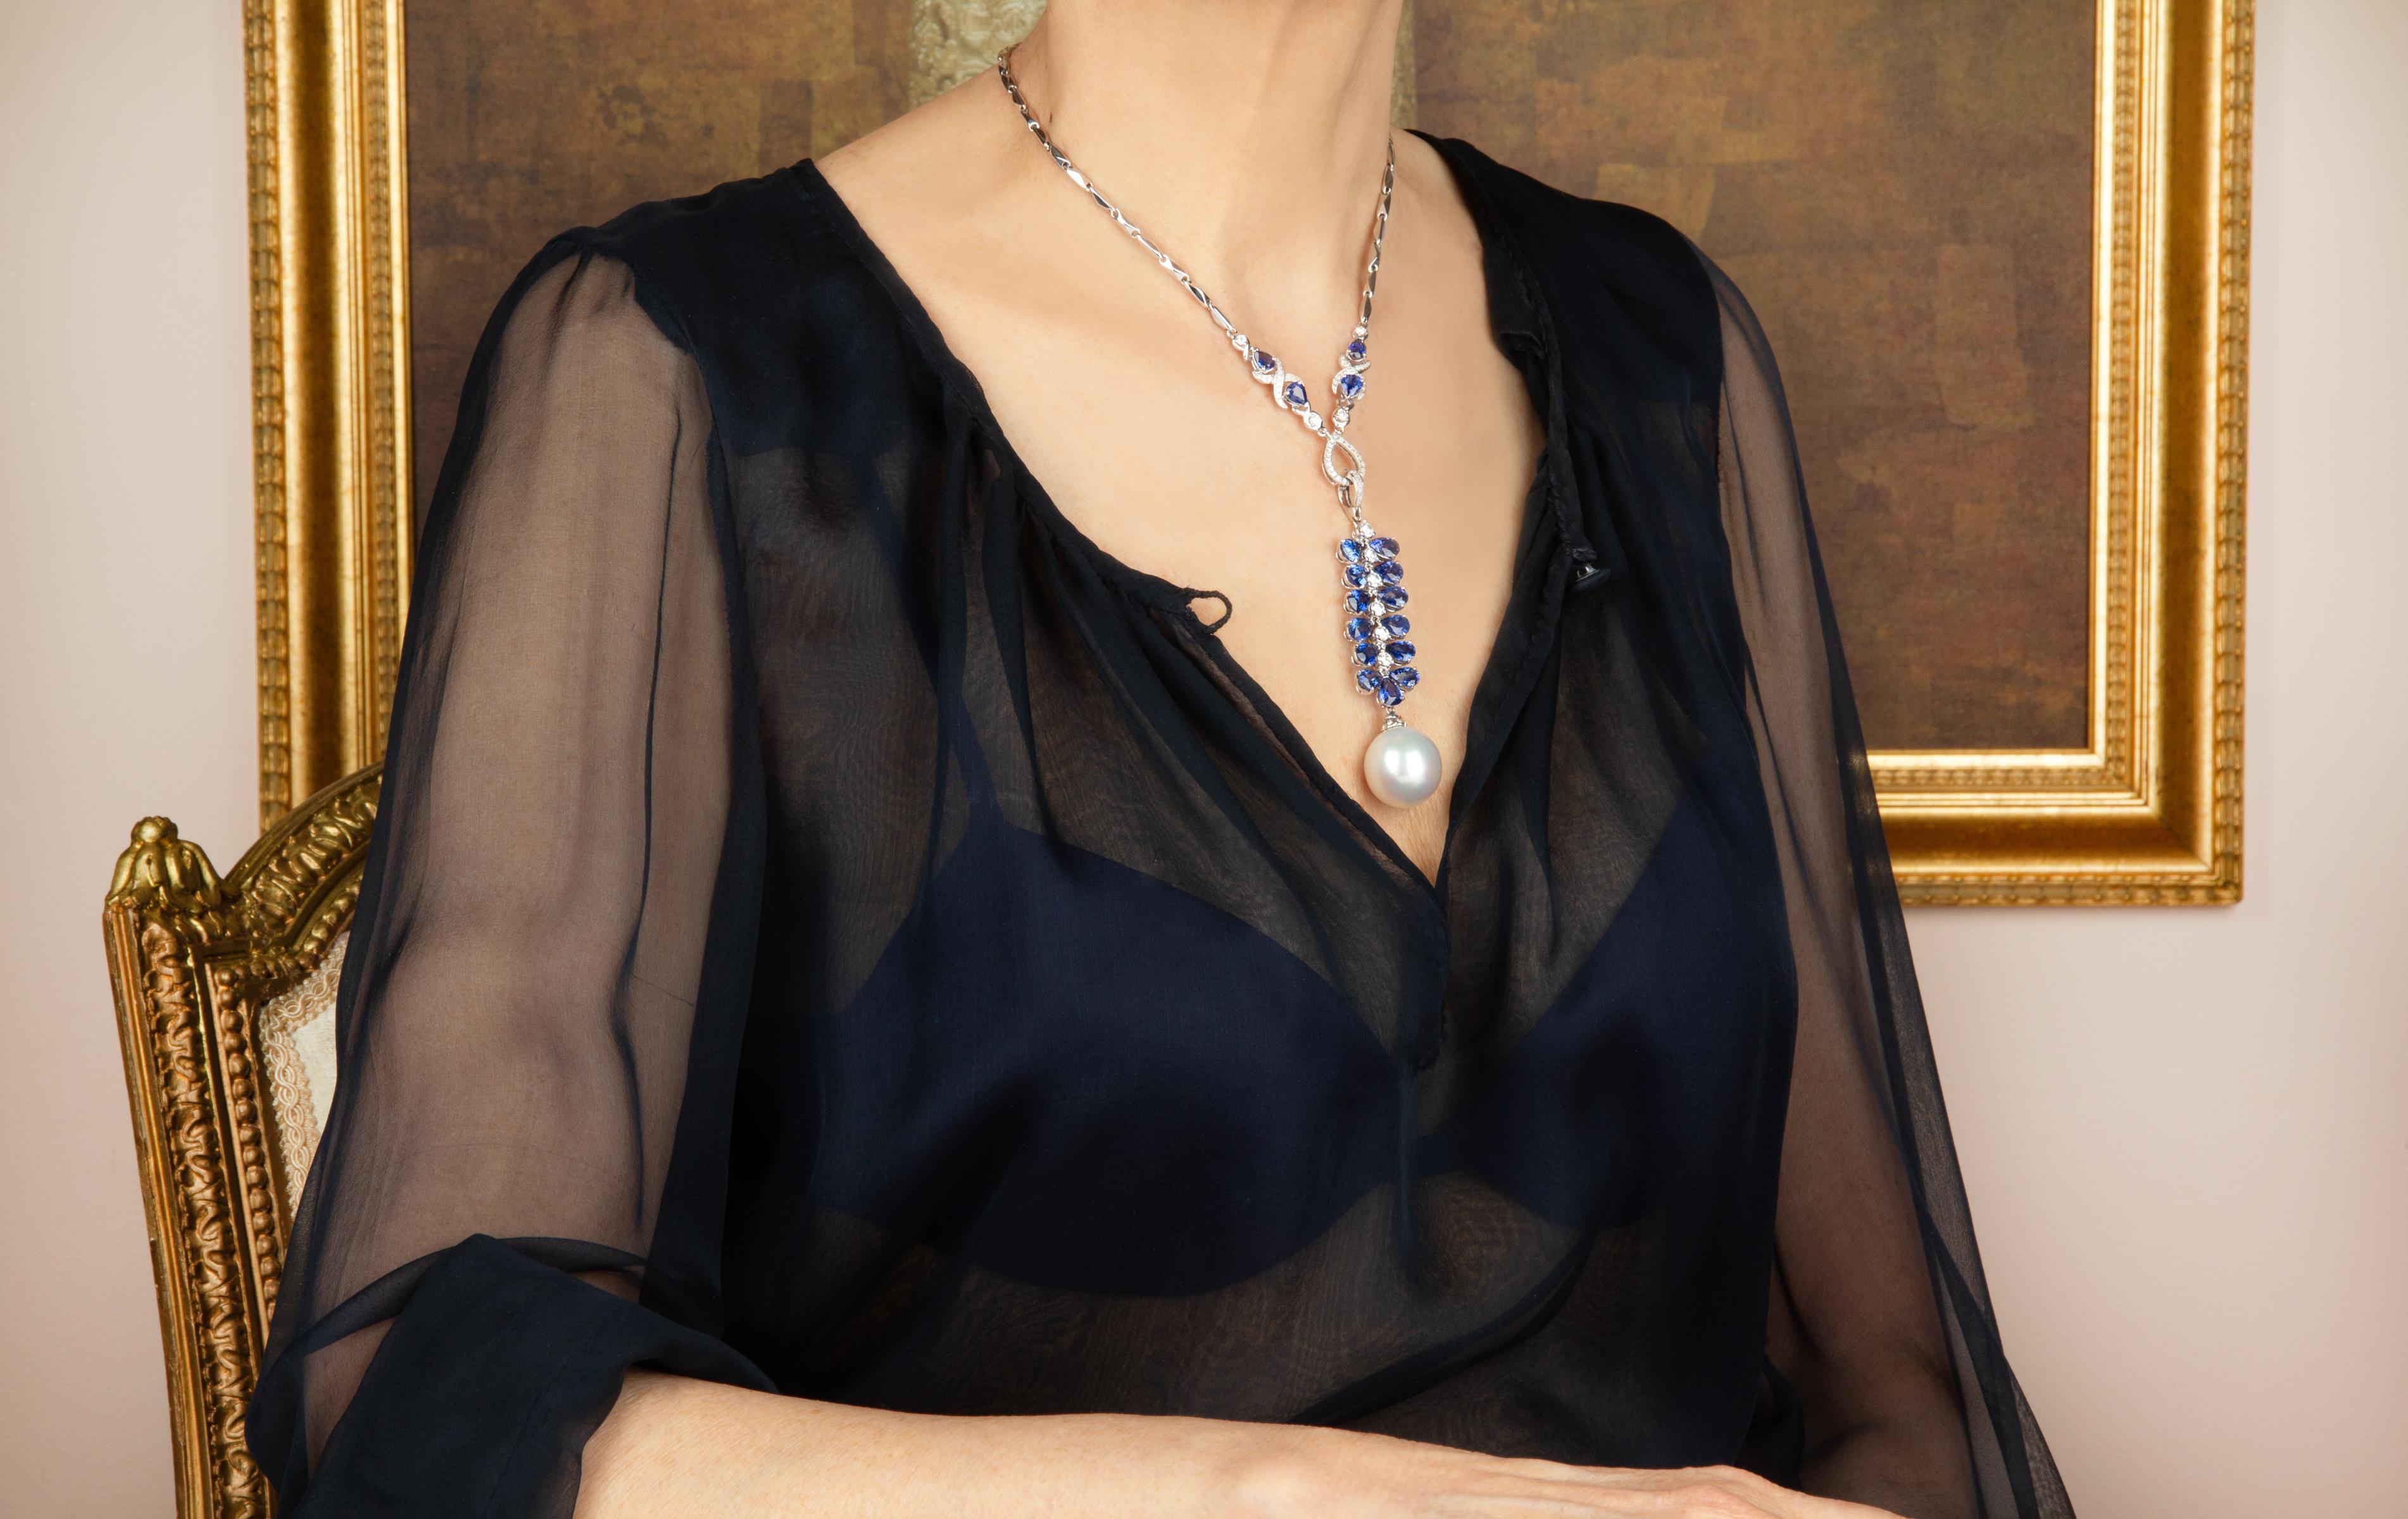 The pendant features an articulated grapevine of drop shape faceted Ceylon blue sapphires flanking a spine of round diamonds. The jewel suspends a splendid South Sea pearl of extraordinary size: 20 x 19mm. The 3.25” pendant is accompanied by a 16”